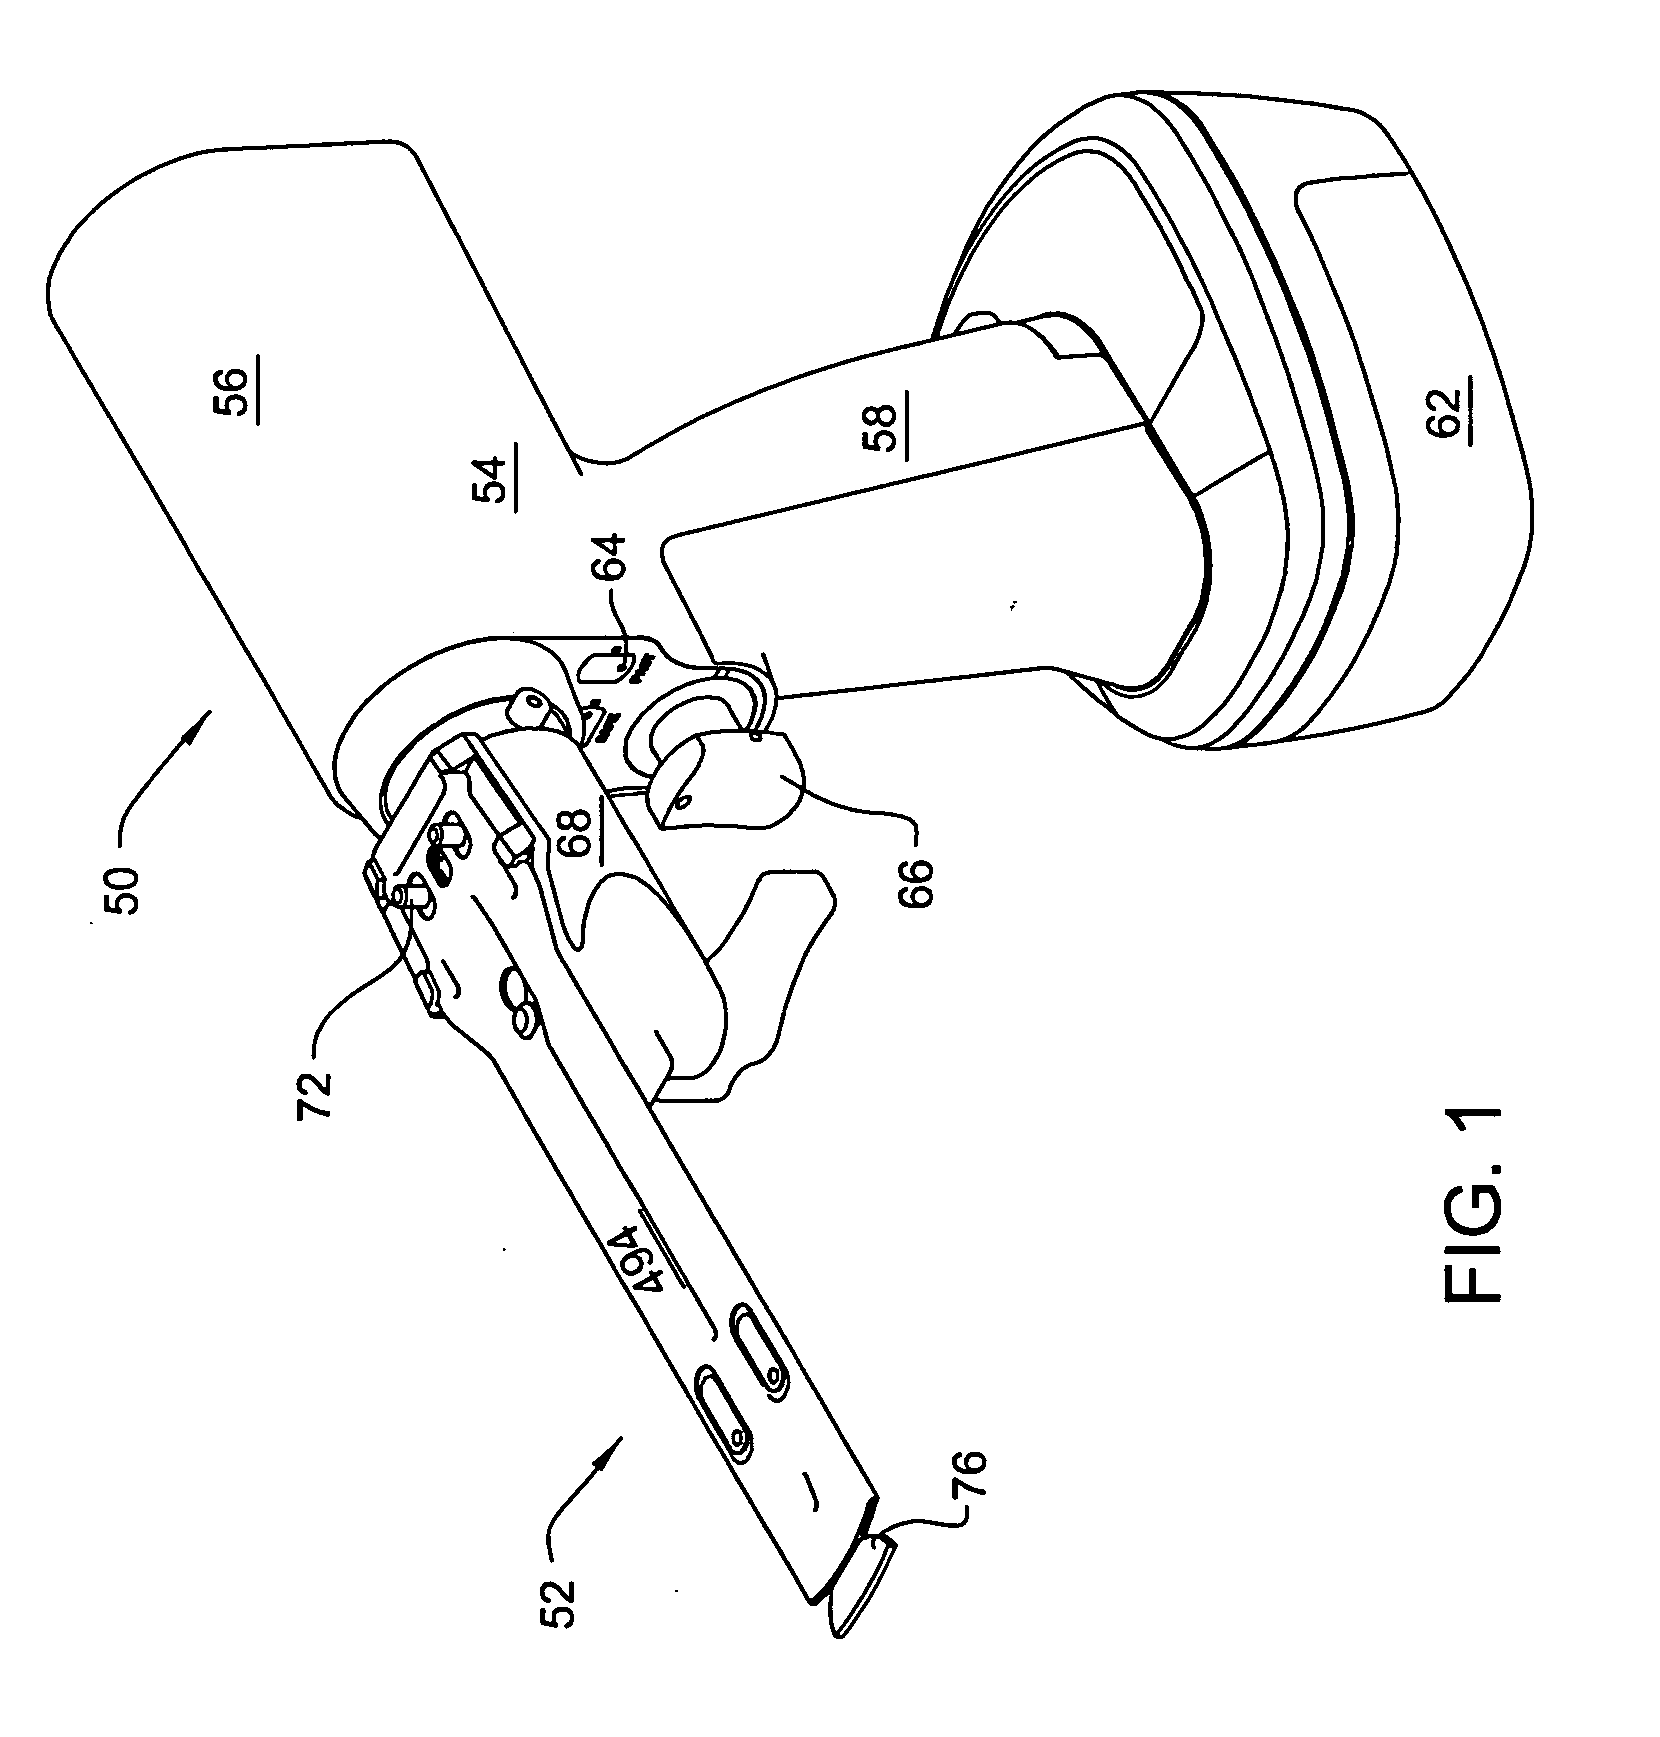 Surgical sagittal saw with indexing head and toolless blade coupling assembly for actuating an oscillating tip saw blade and oscillating tip saw blade with self cleaning head